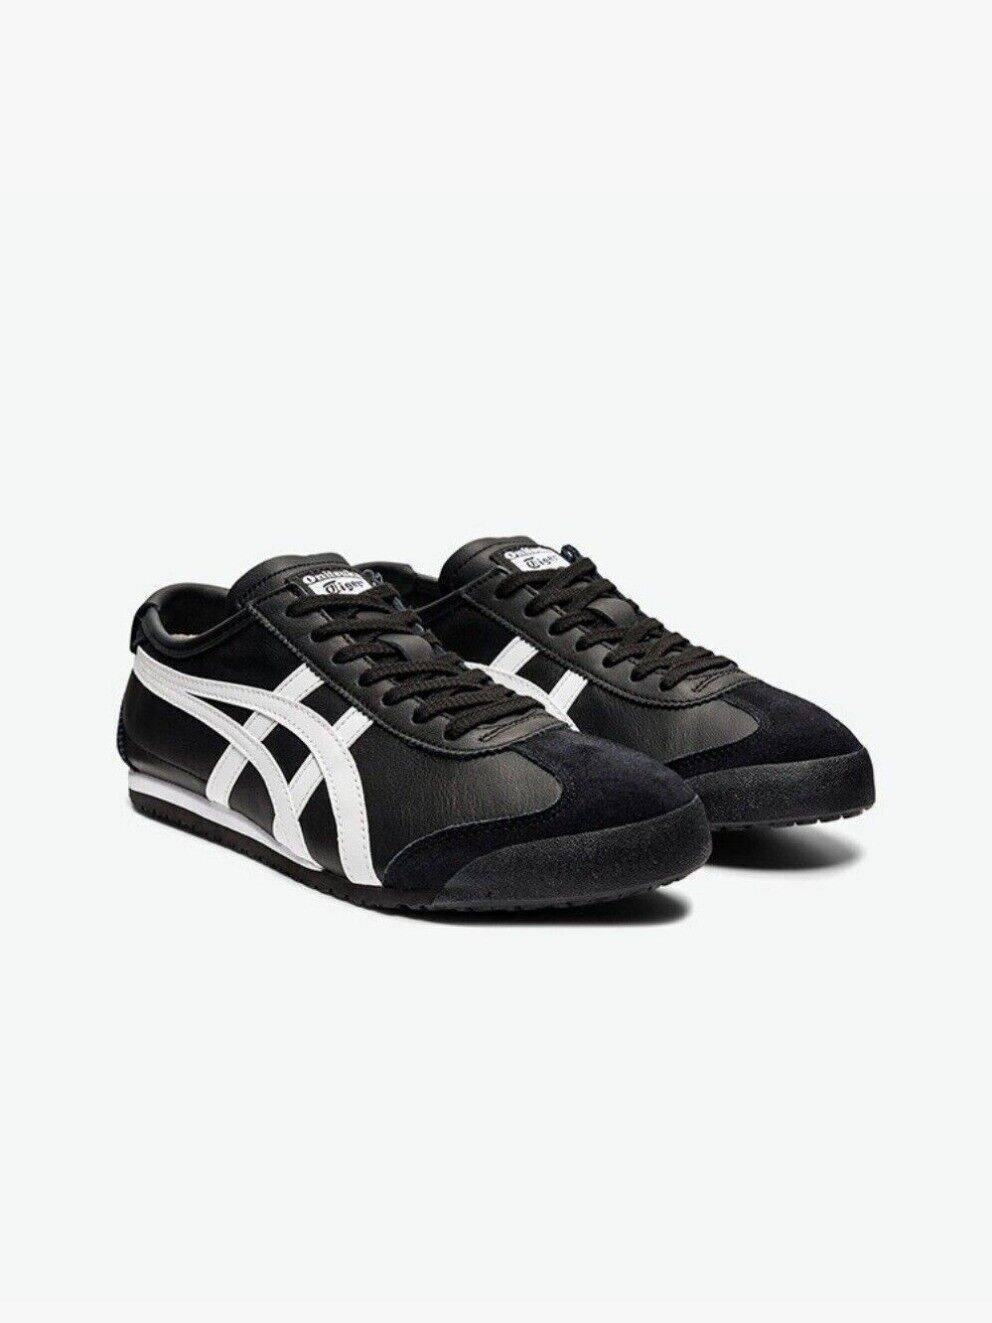 2024New Onitsuka Tiger MEXICO 66 Classic Unisex Shoes Black/White Retro Sneakers